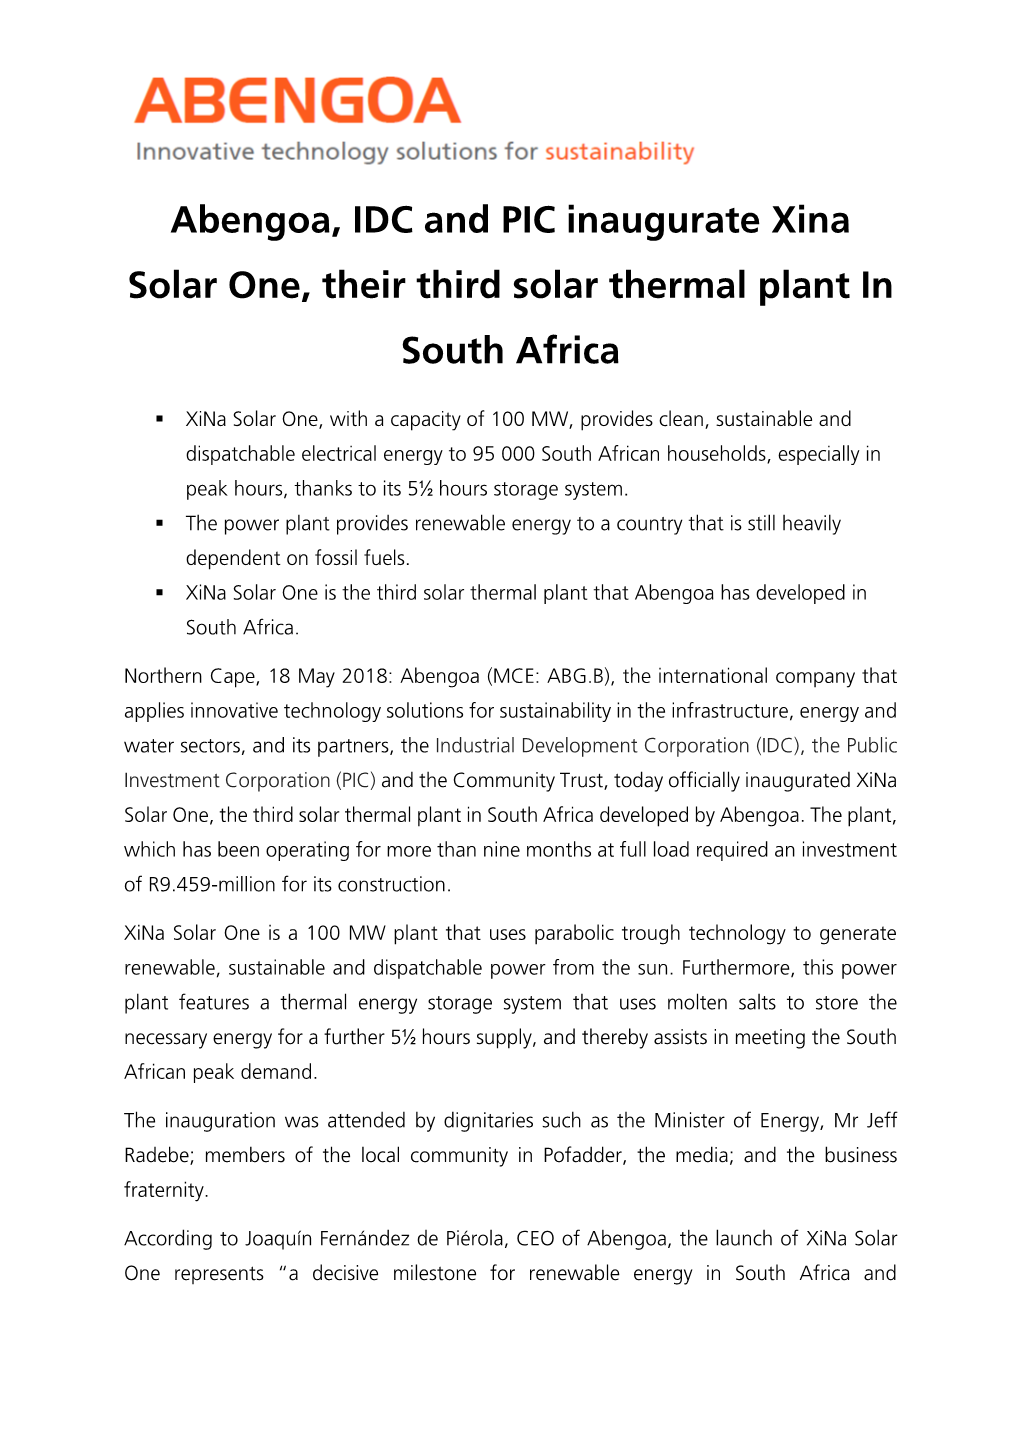 Abengoa, IDC and PIC Inaugurate Xina Solar One, Their Third Solar Thermal Plant in South Africa